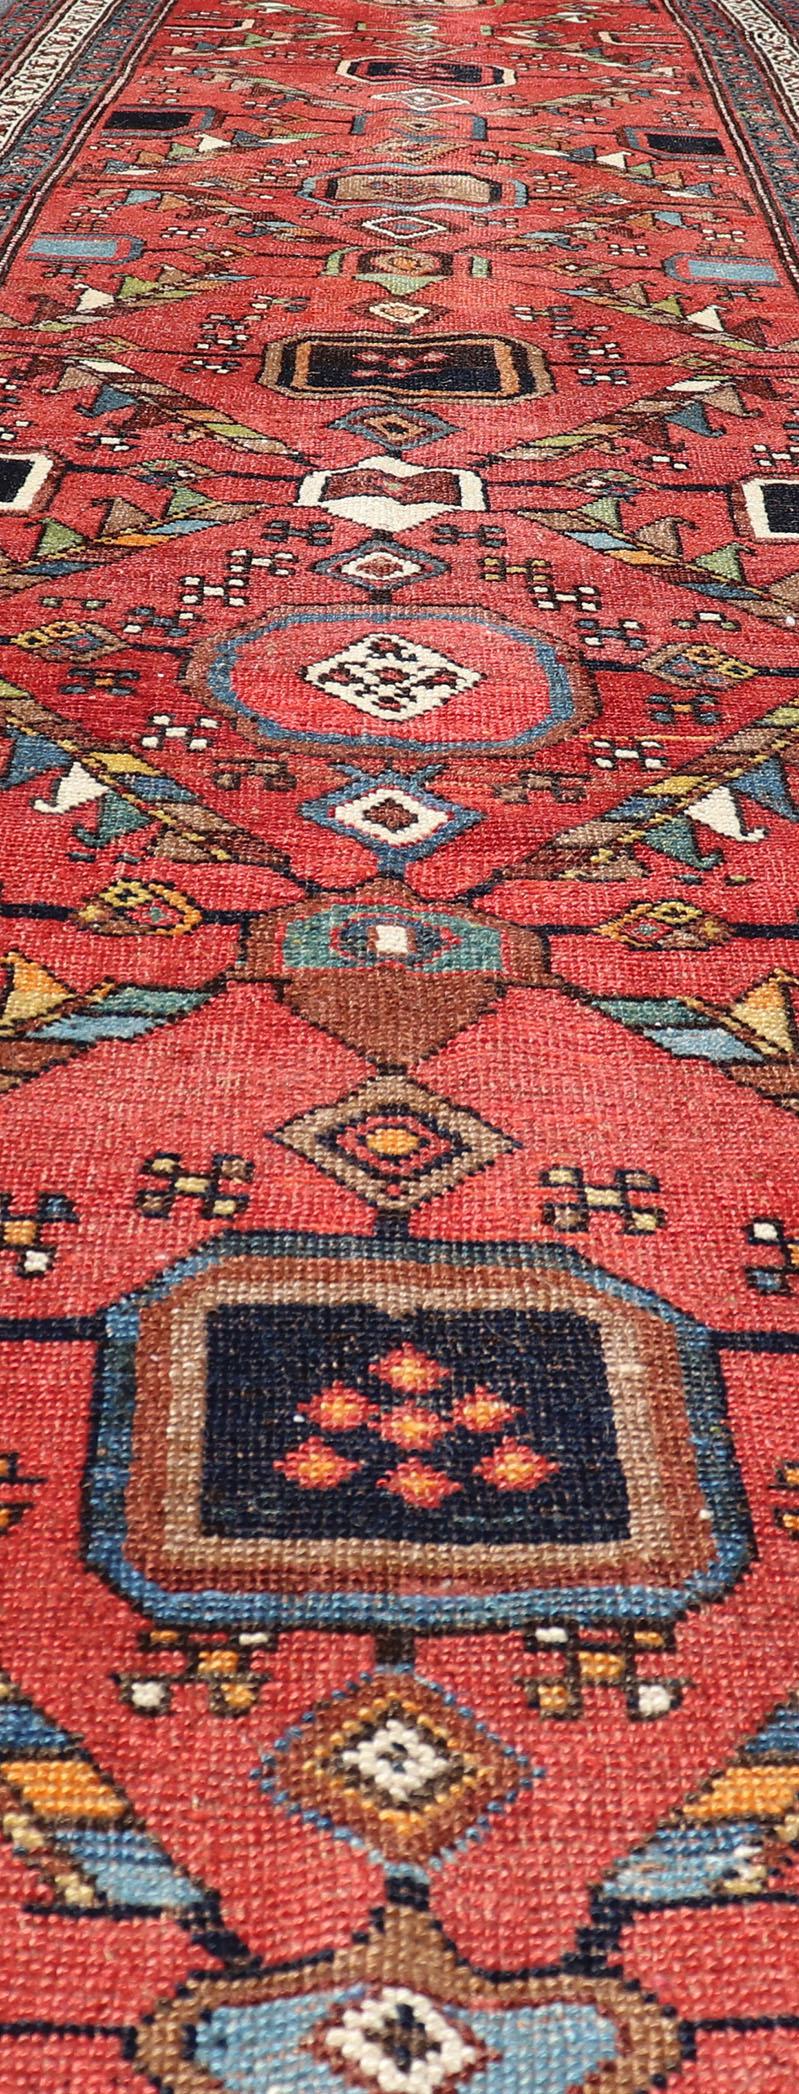 Tribal Kurdish Antique Runner in Vibrant Red Background and Multi-tiered Border For Sale